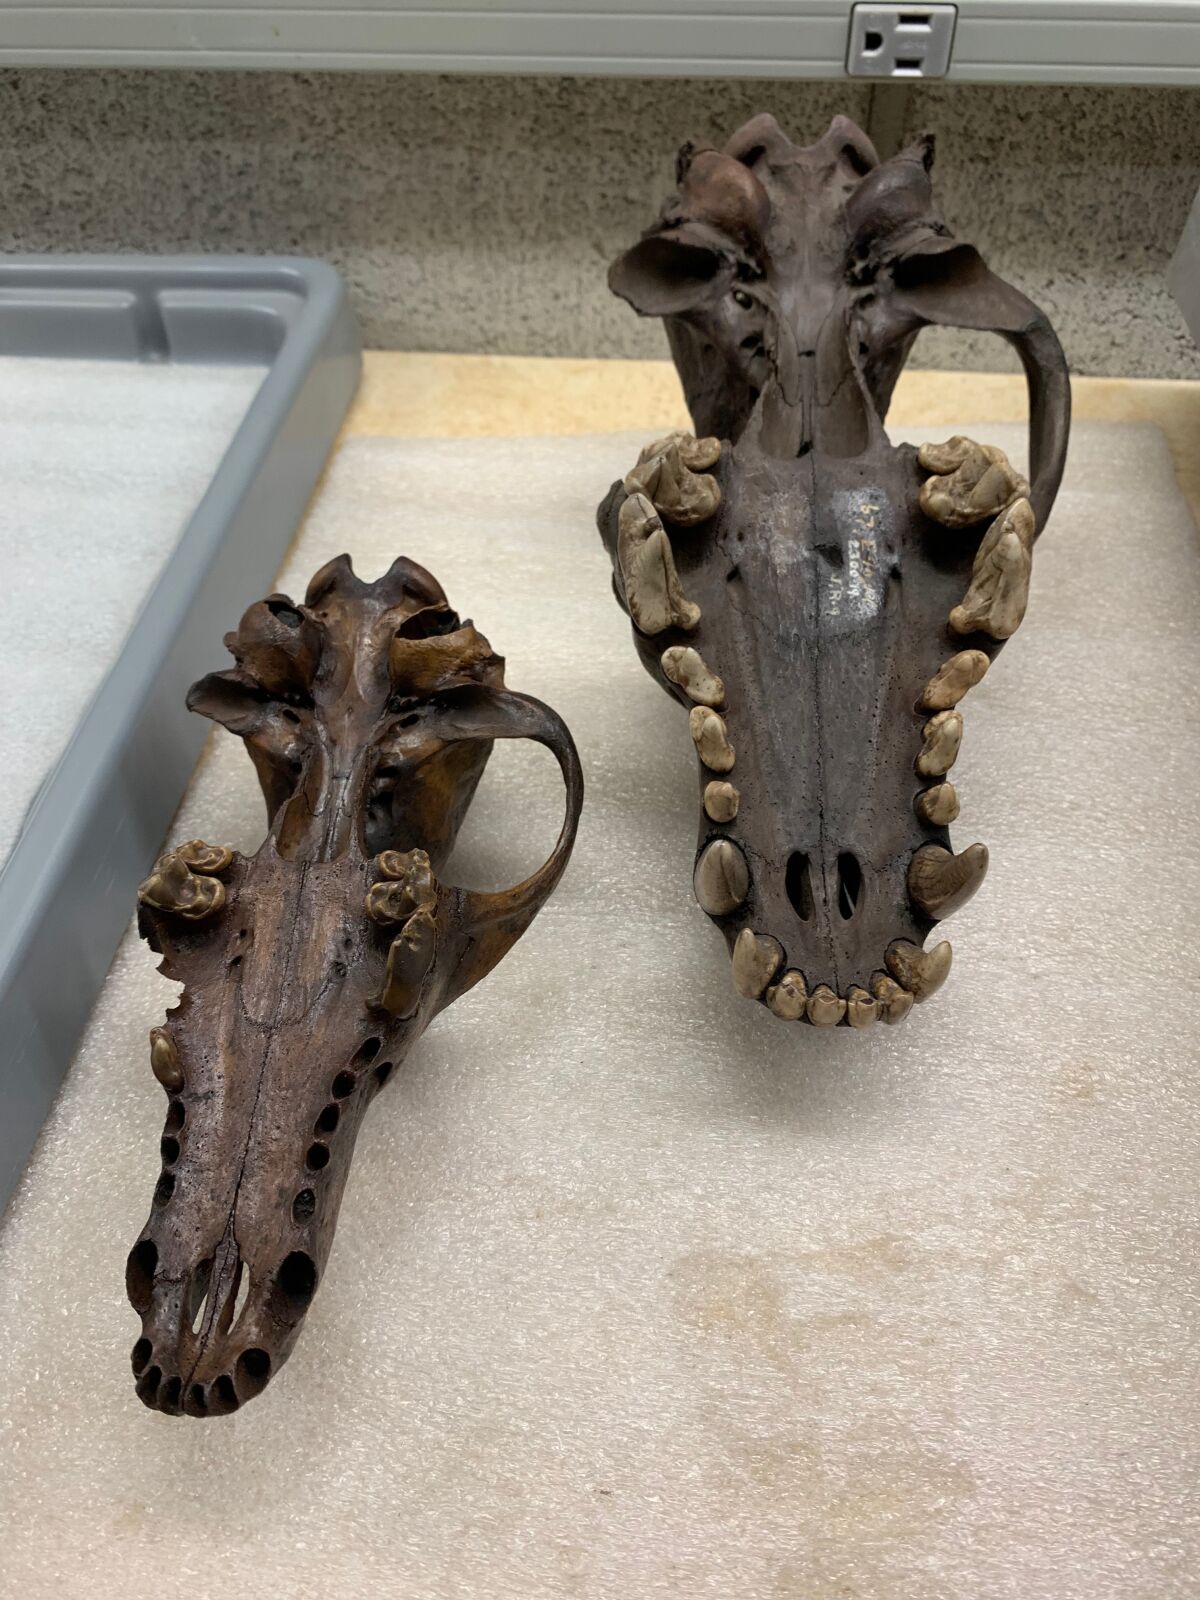 Two fossilized jaws